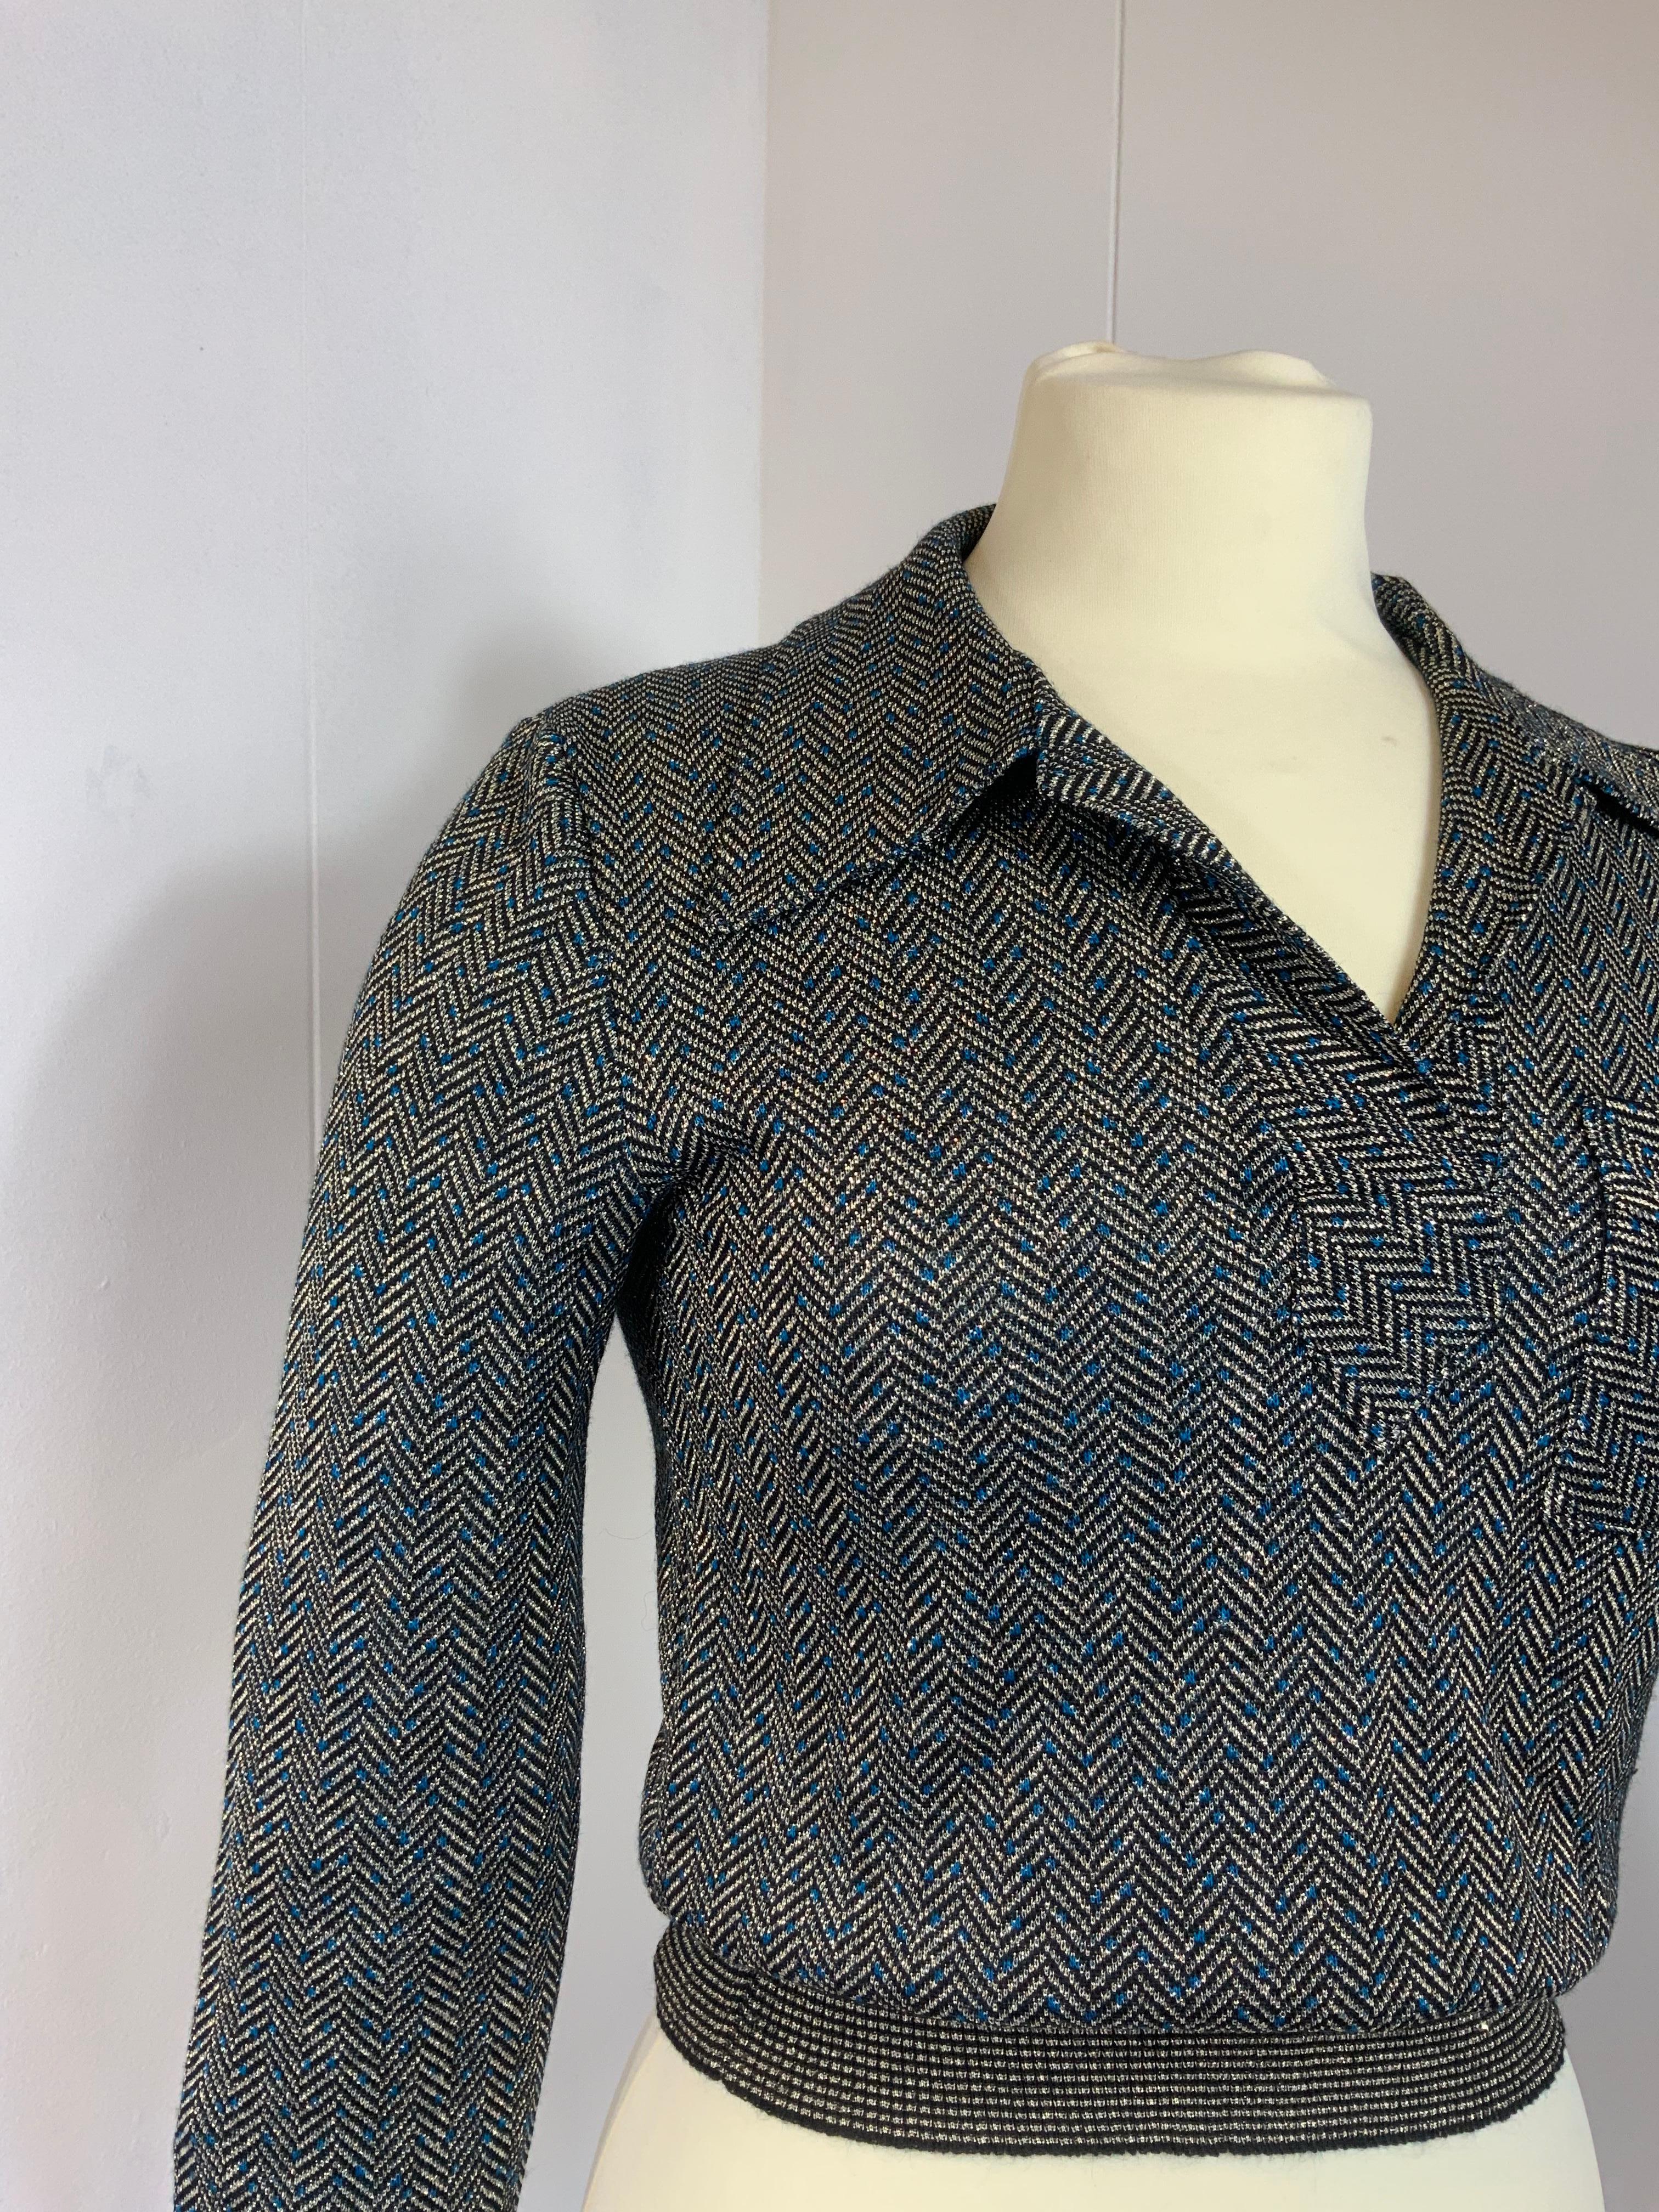 Callaghan lurex and wool jumper by Gianni Versace In Good Condition For Sale In Carnate, IT